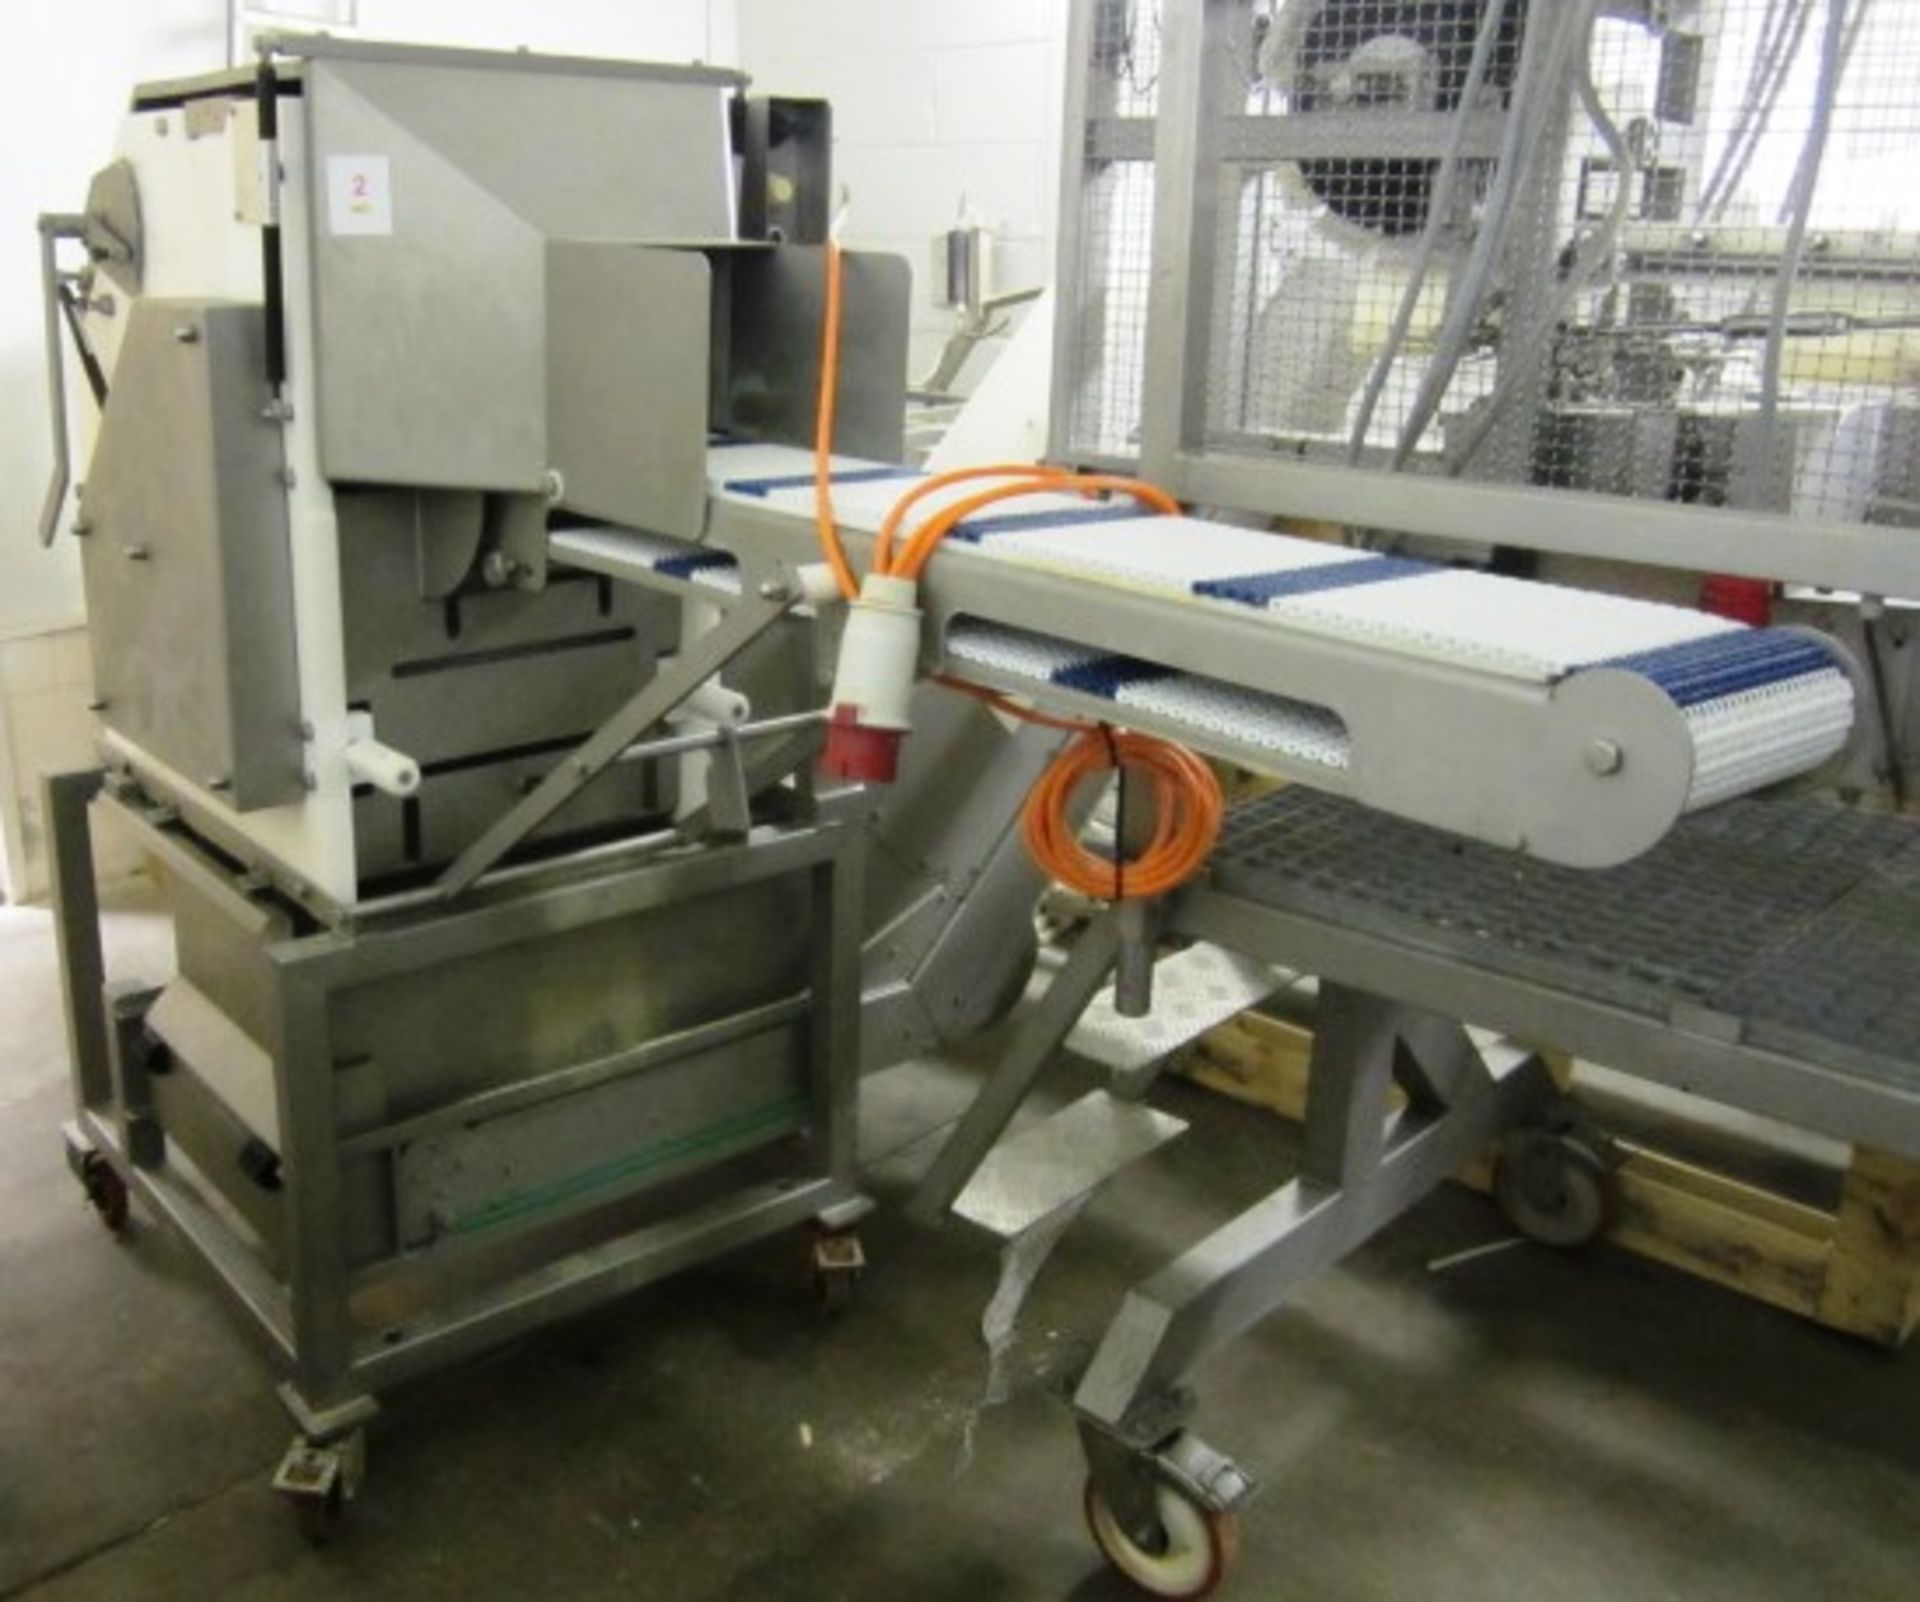 Steen Stainless Steel mobile chicken breast skinning machine, type ST 650 / 3010A (2010) with